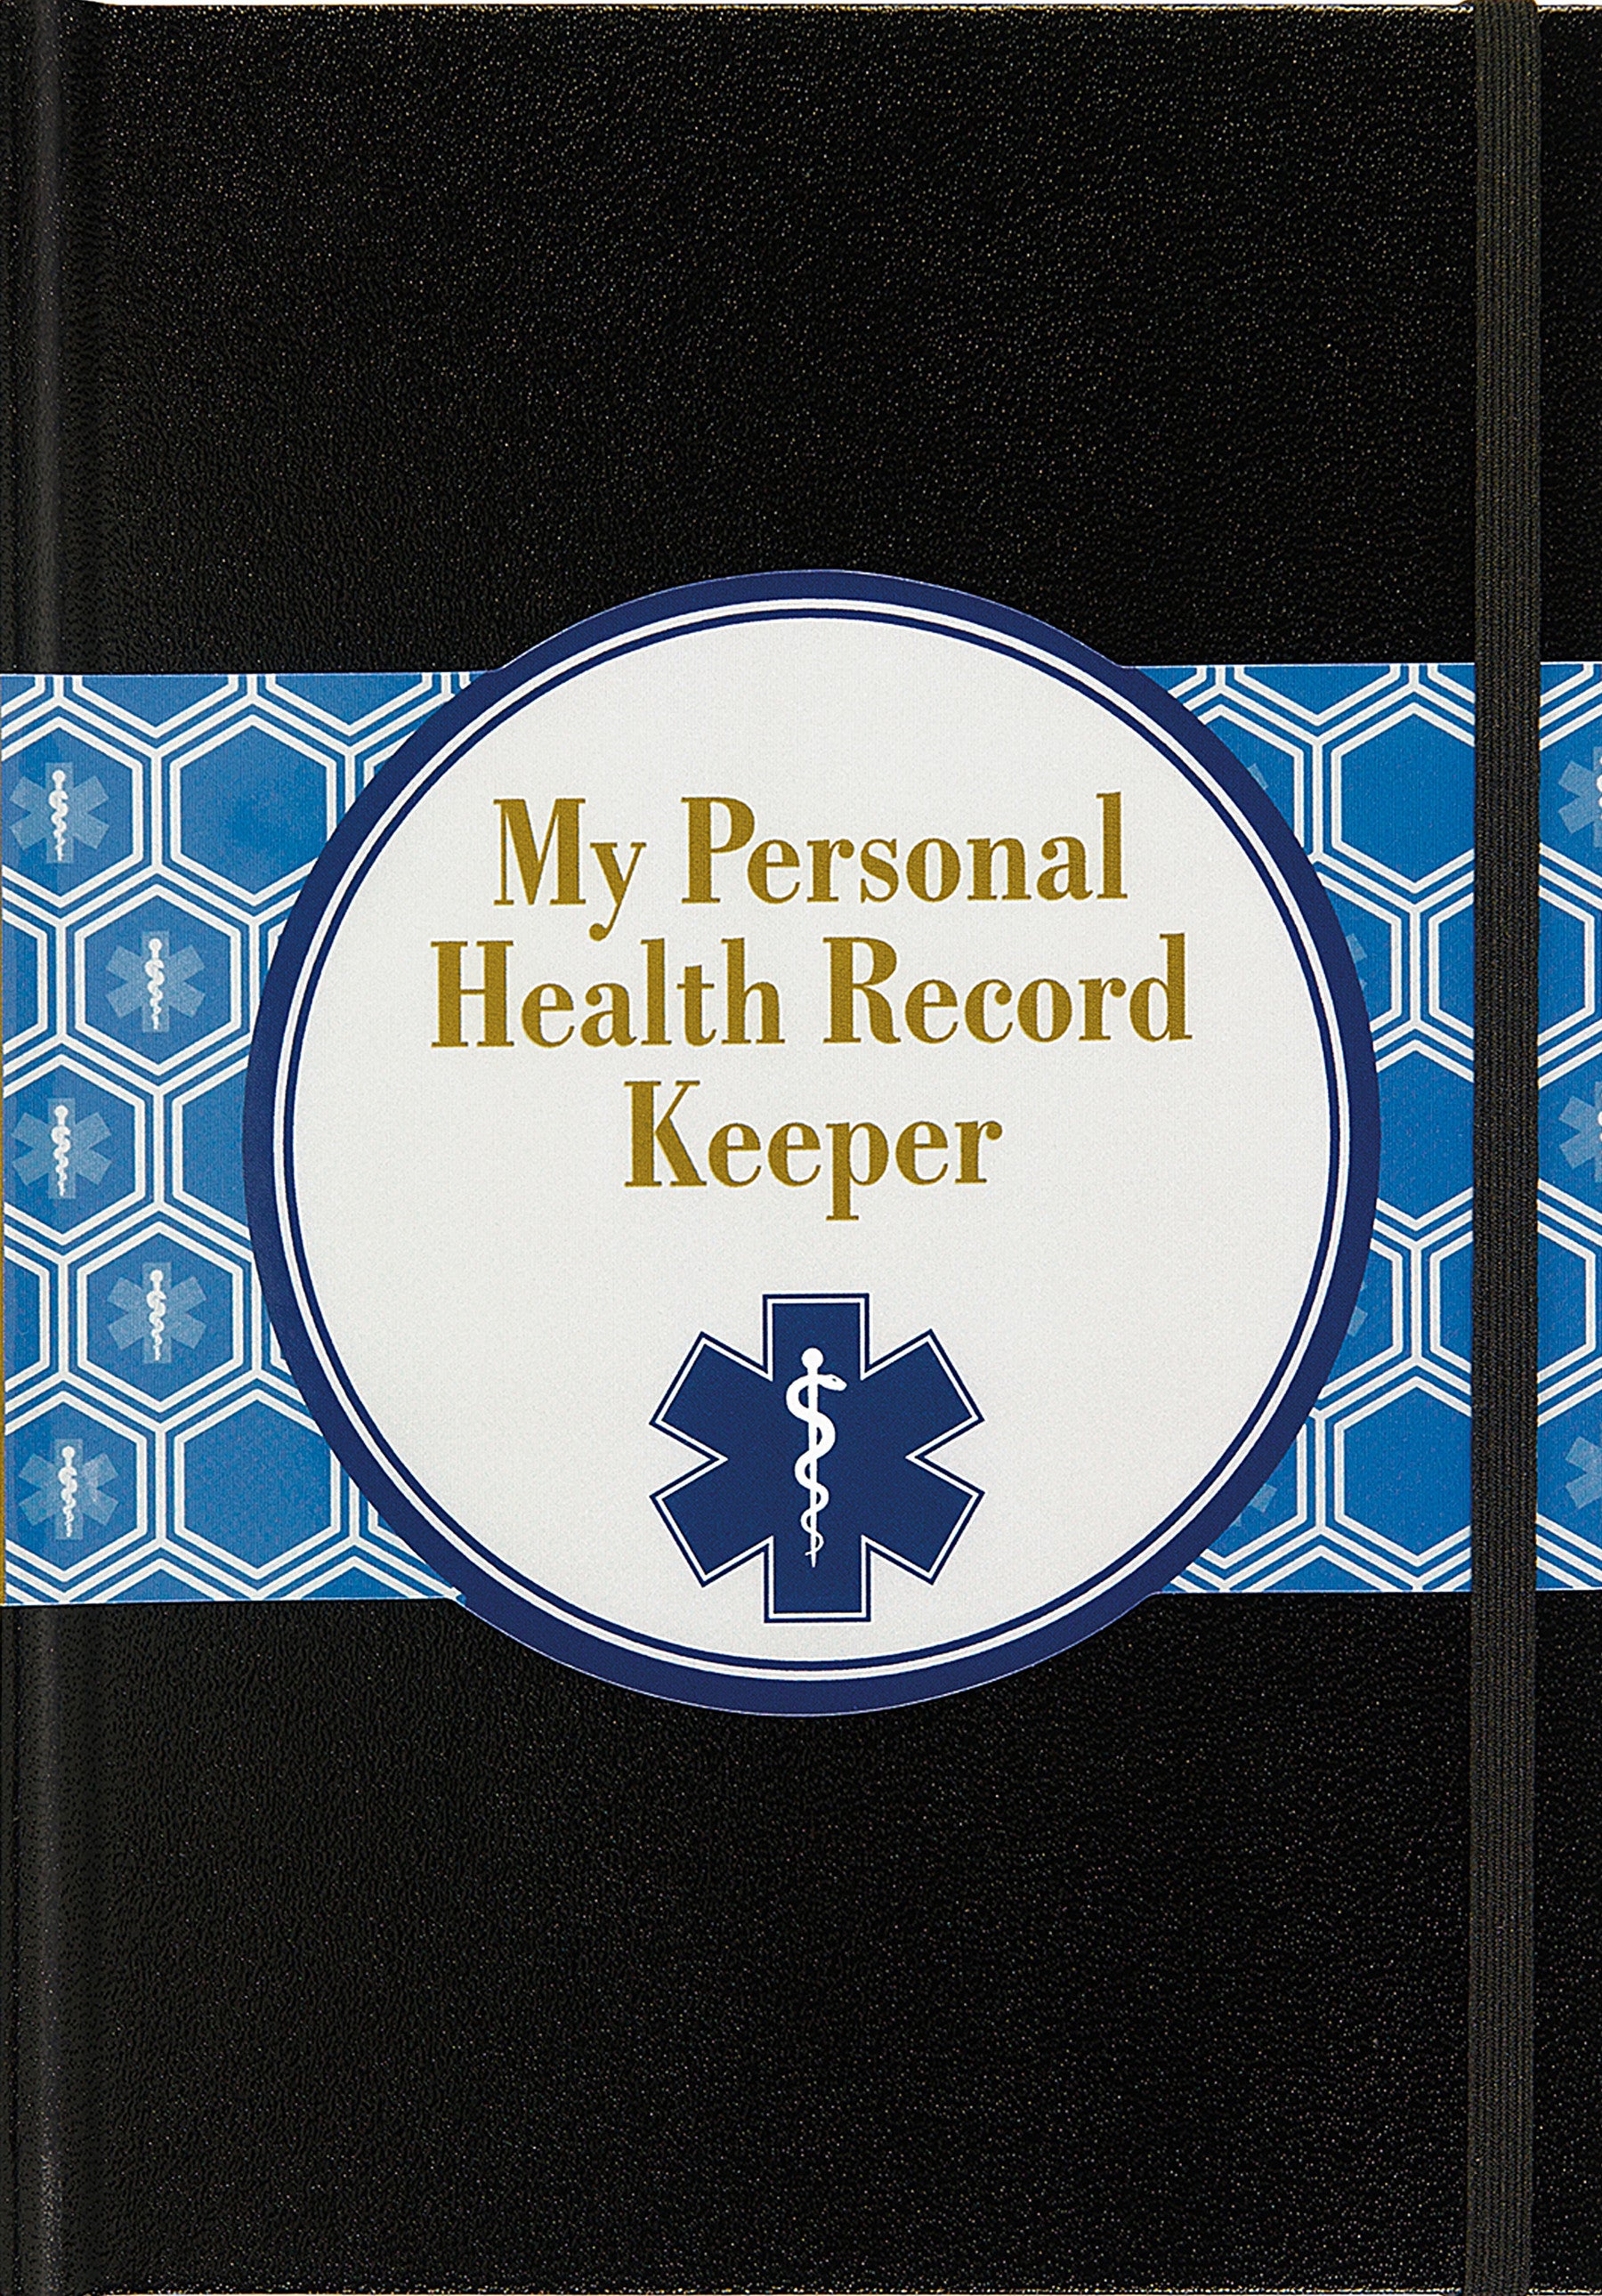 My Personal Health Record Keeper